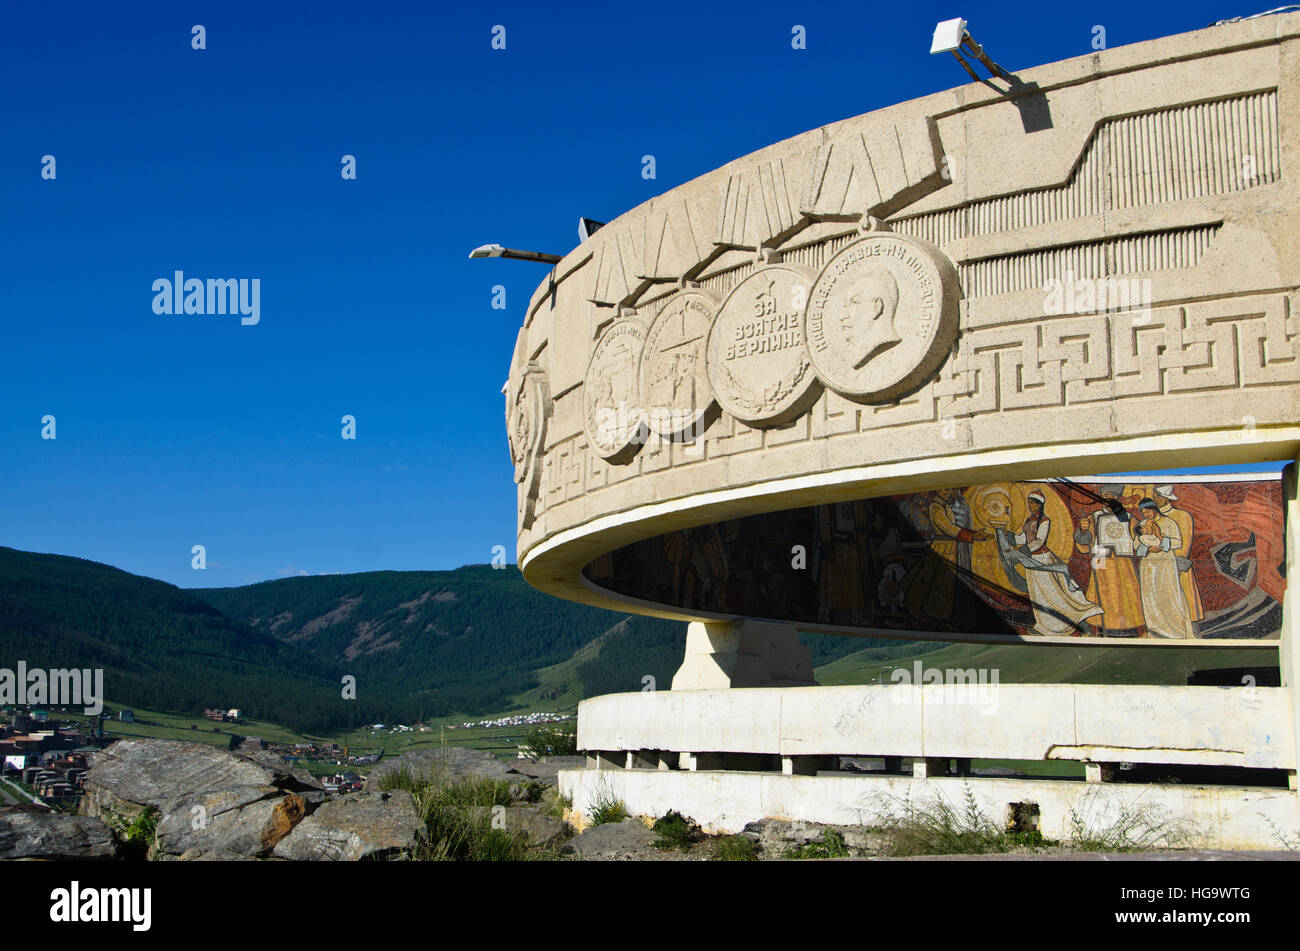 Zaisal Memorial Hill on the south side of Ulaan baatar Stock Photo